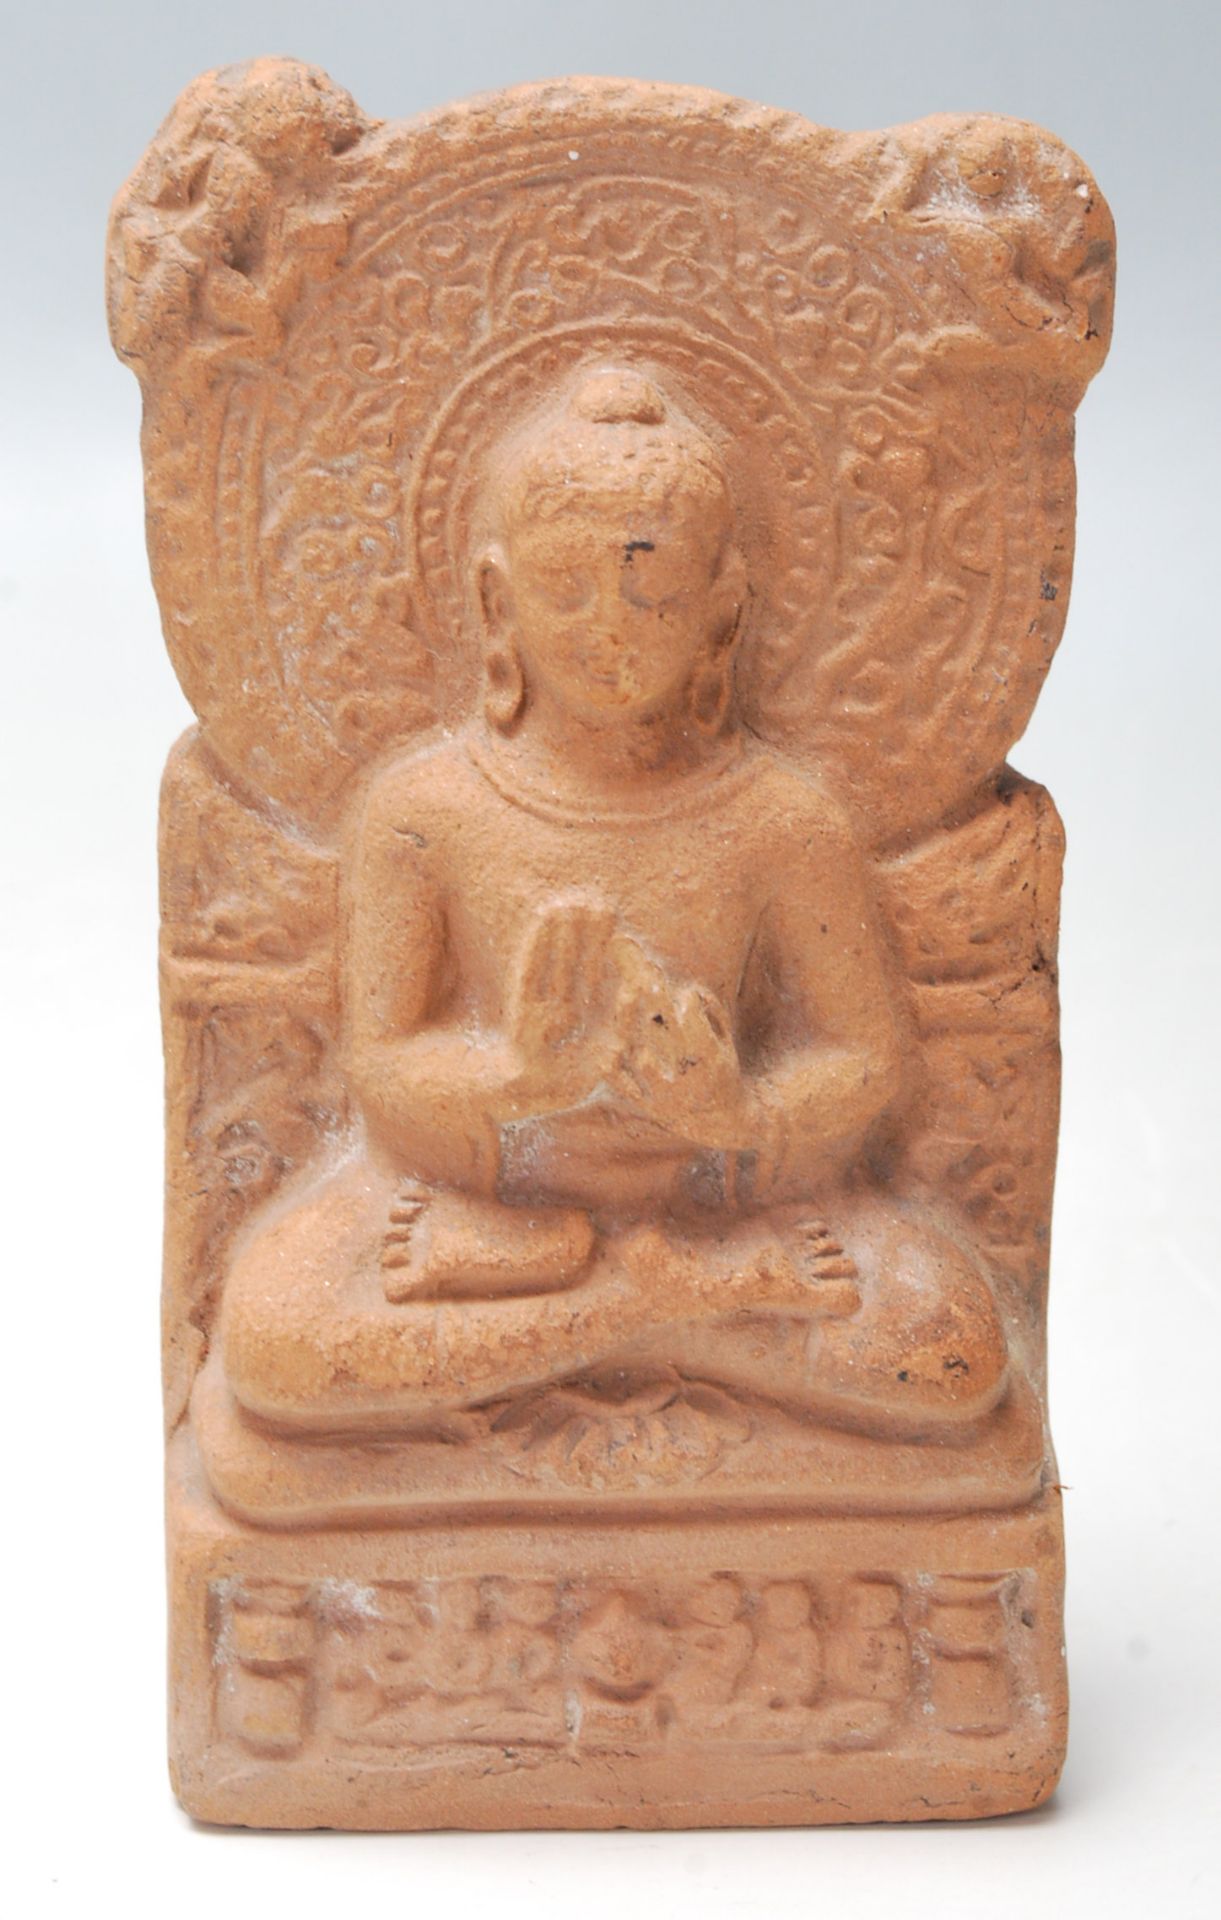 An antique 19th Century Indian terracotta buddha seated in the lotus position. The buddha having